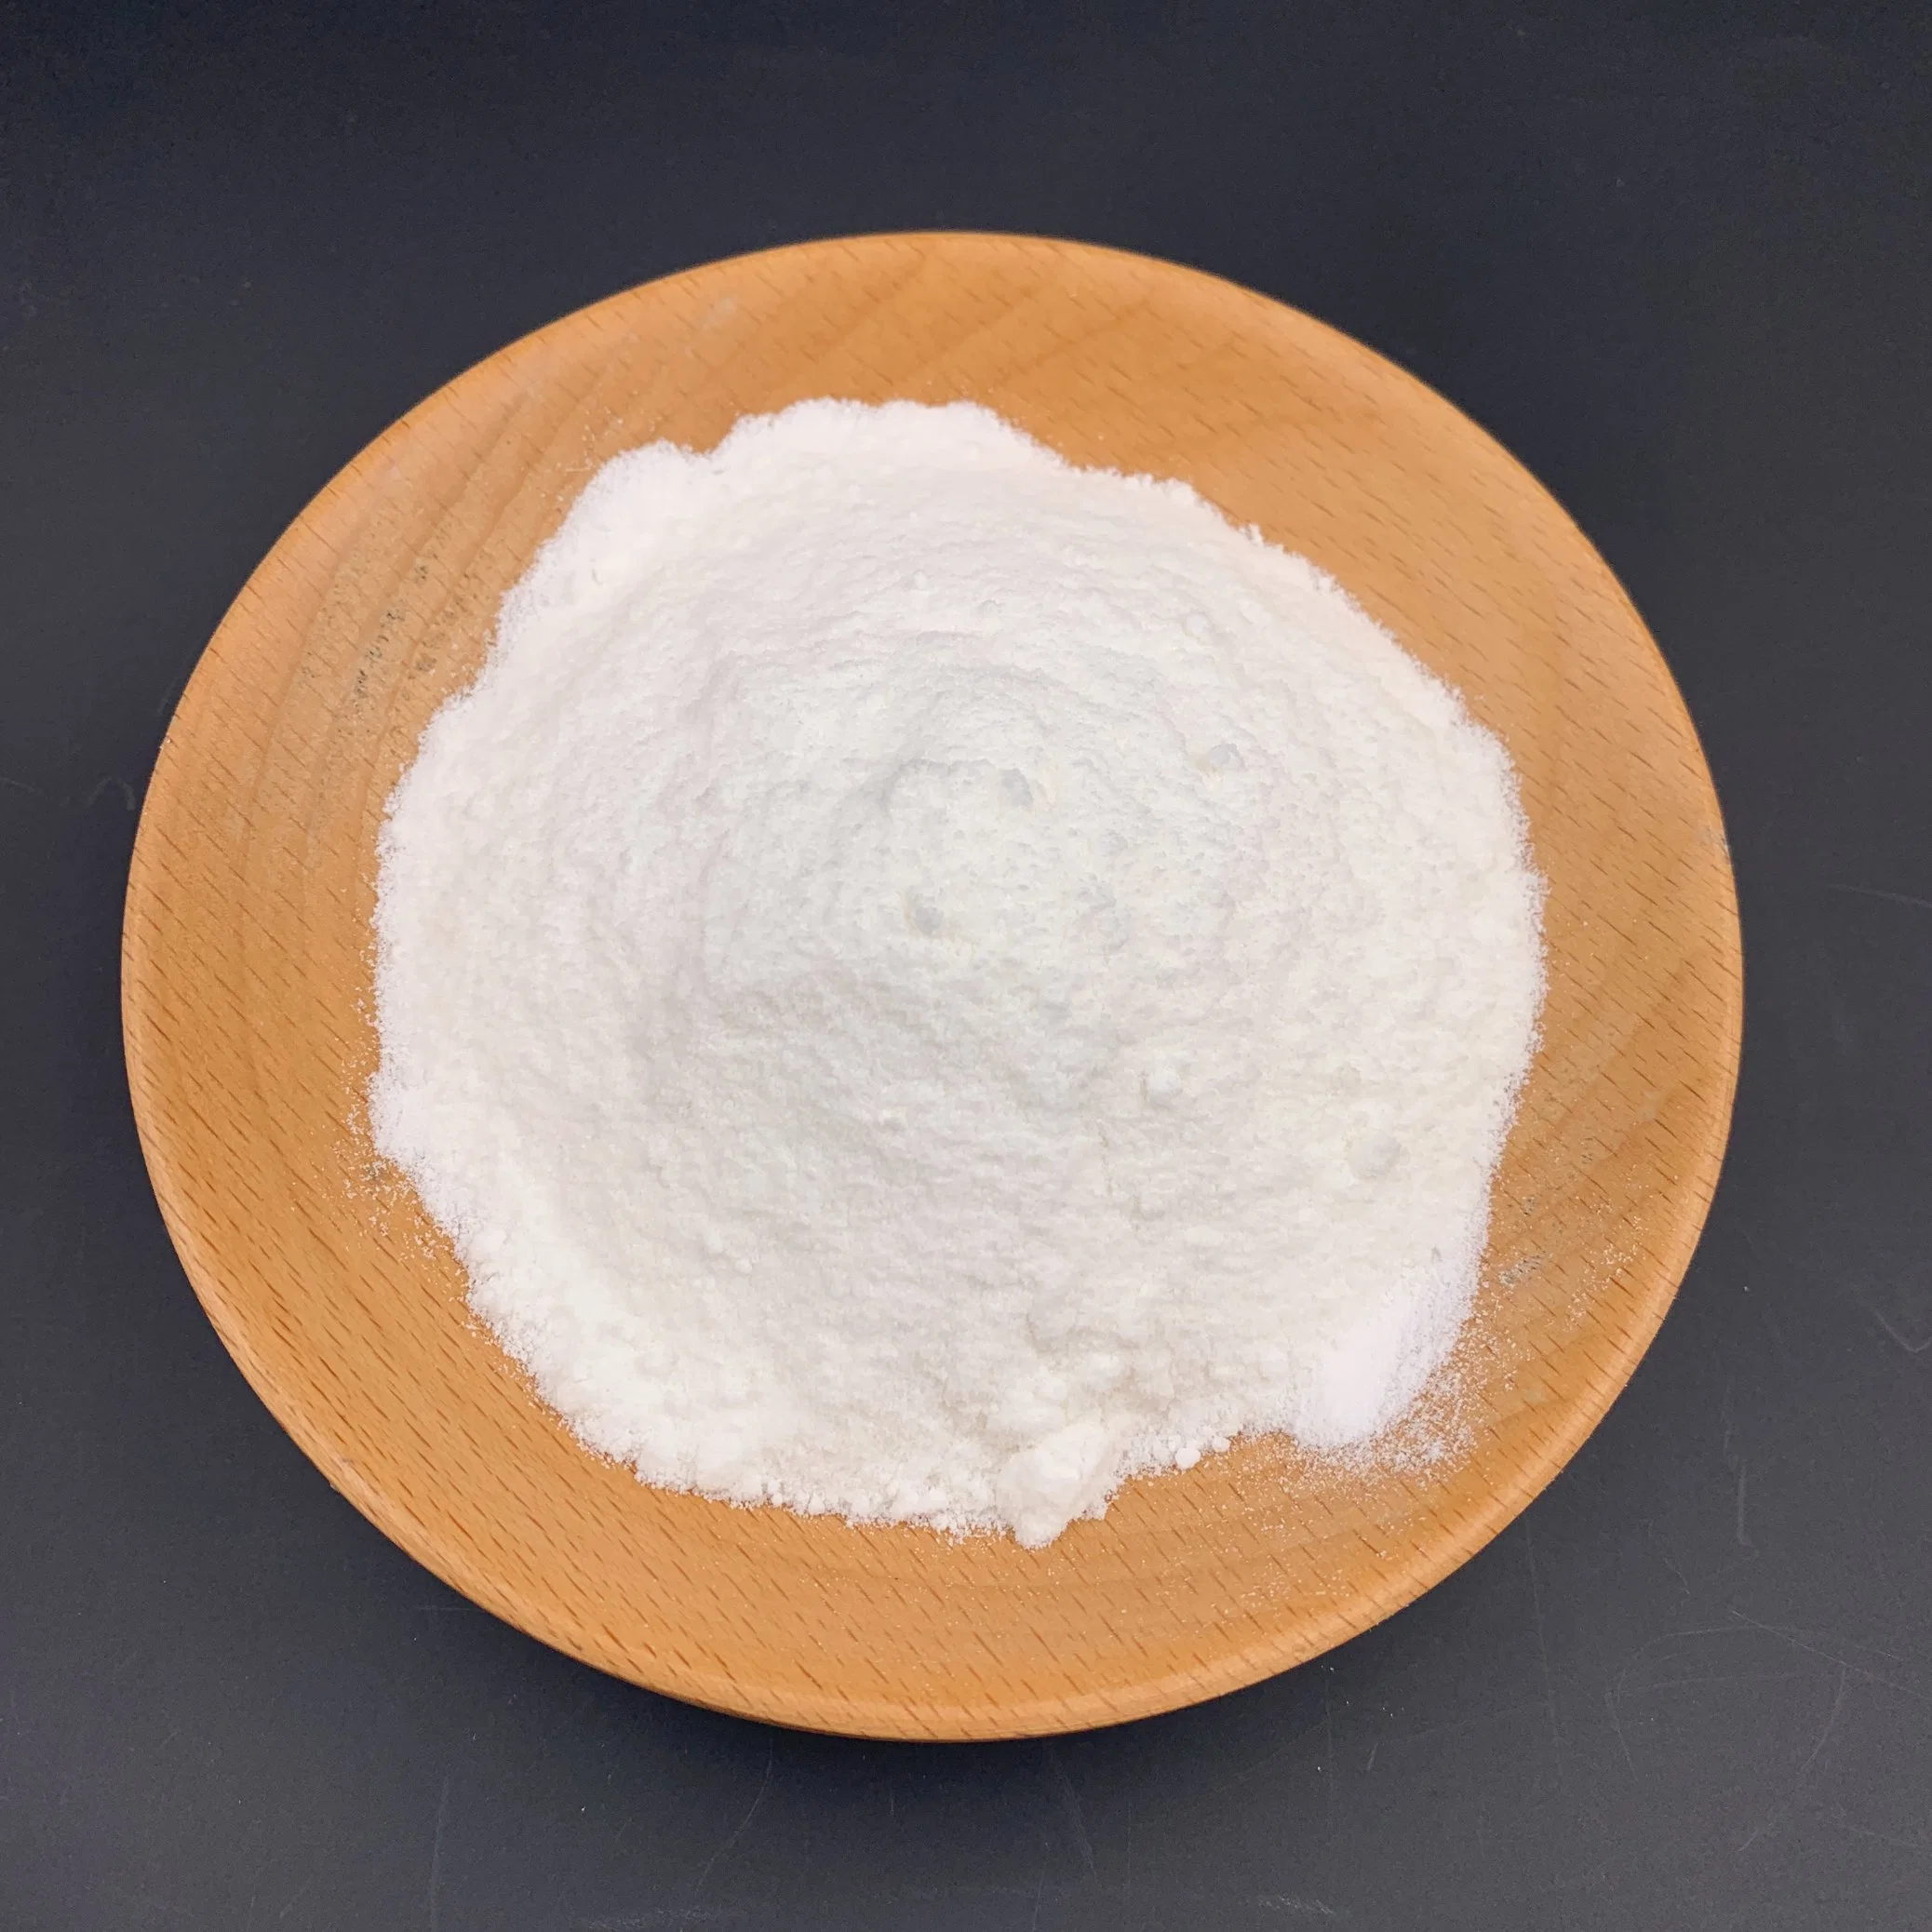 Hot Sell Ammonium Bicarbonate Food Grade /Food Additives /Food Leavening Agent Used as a Perservative in Food